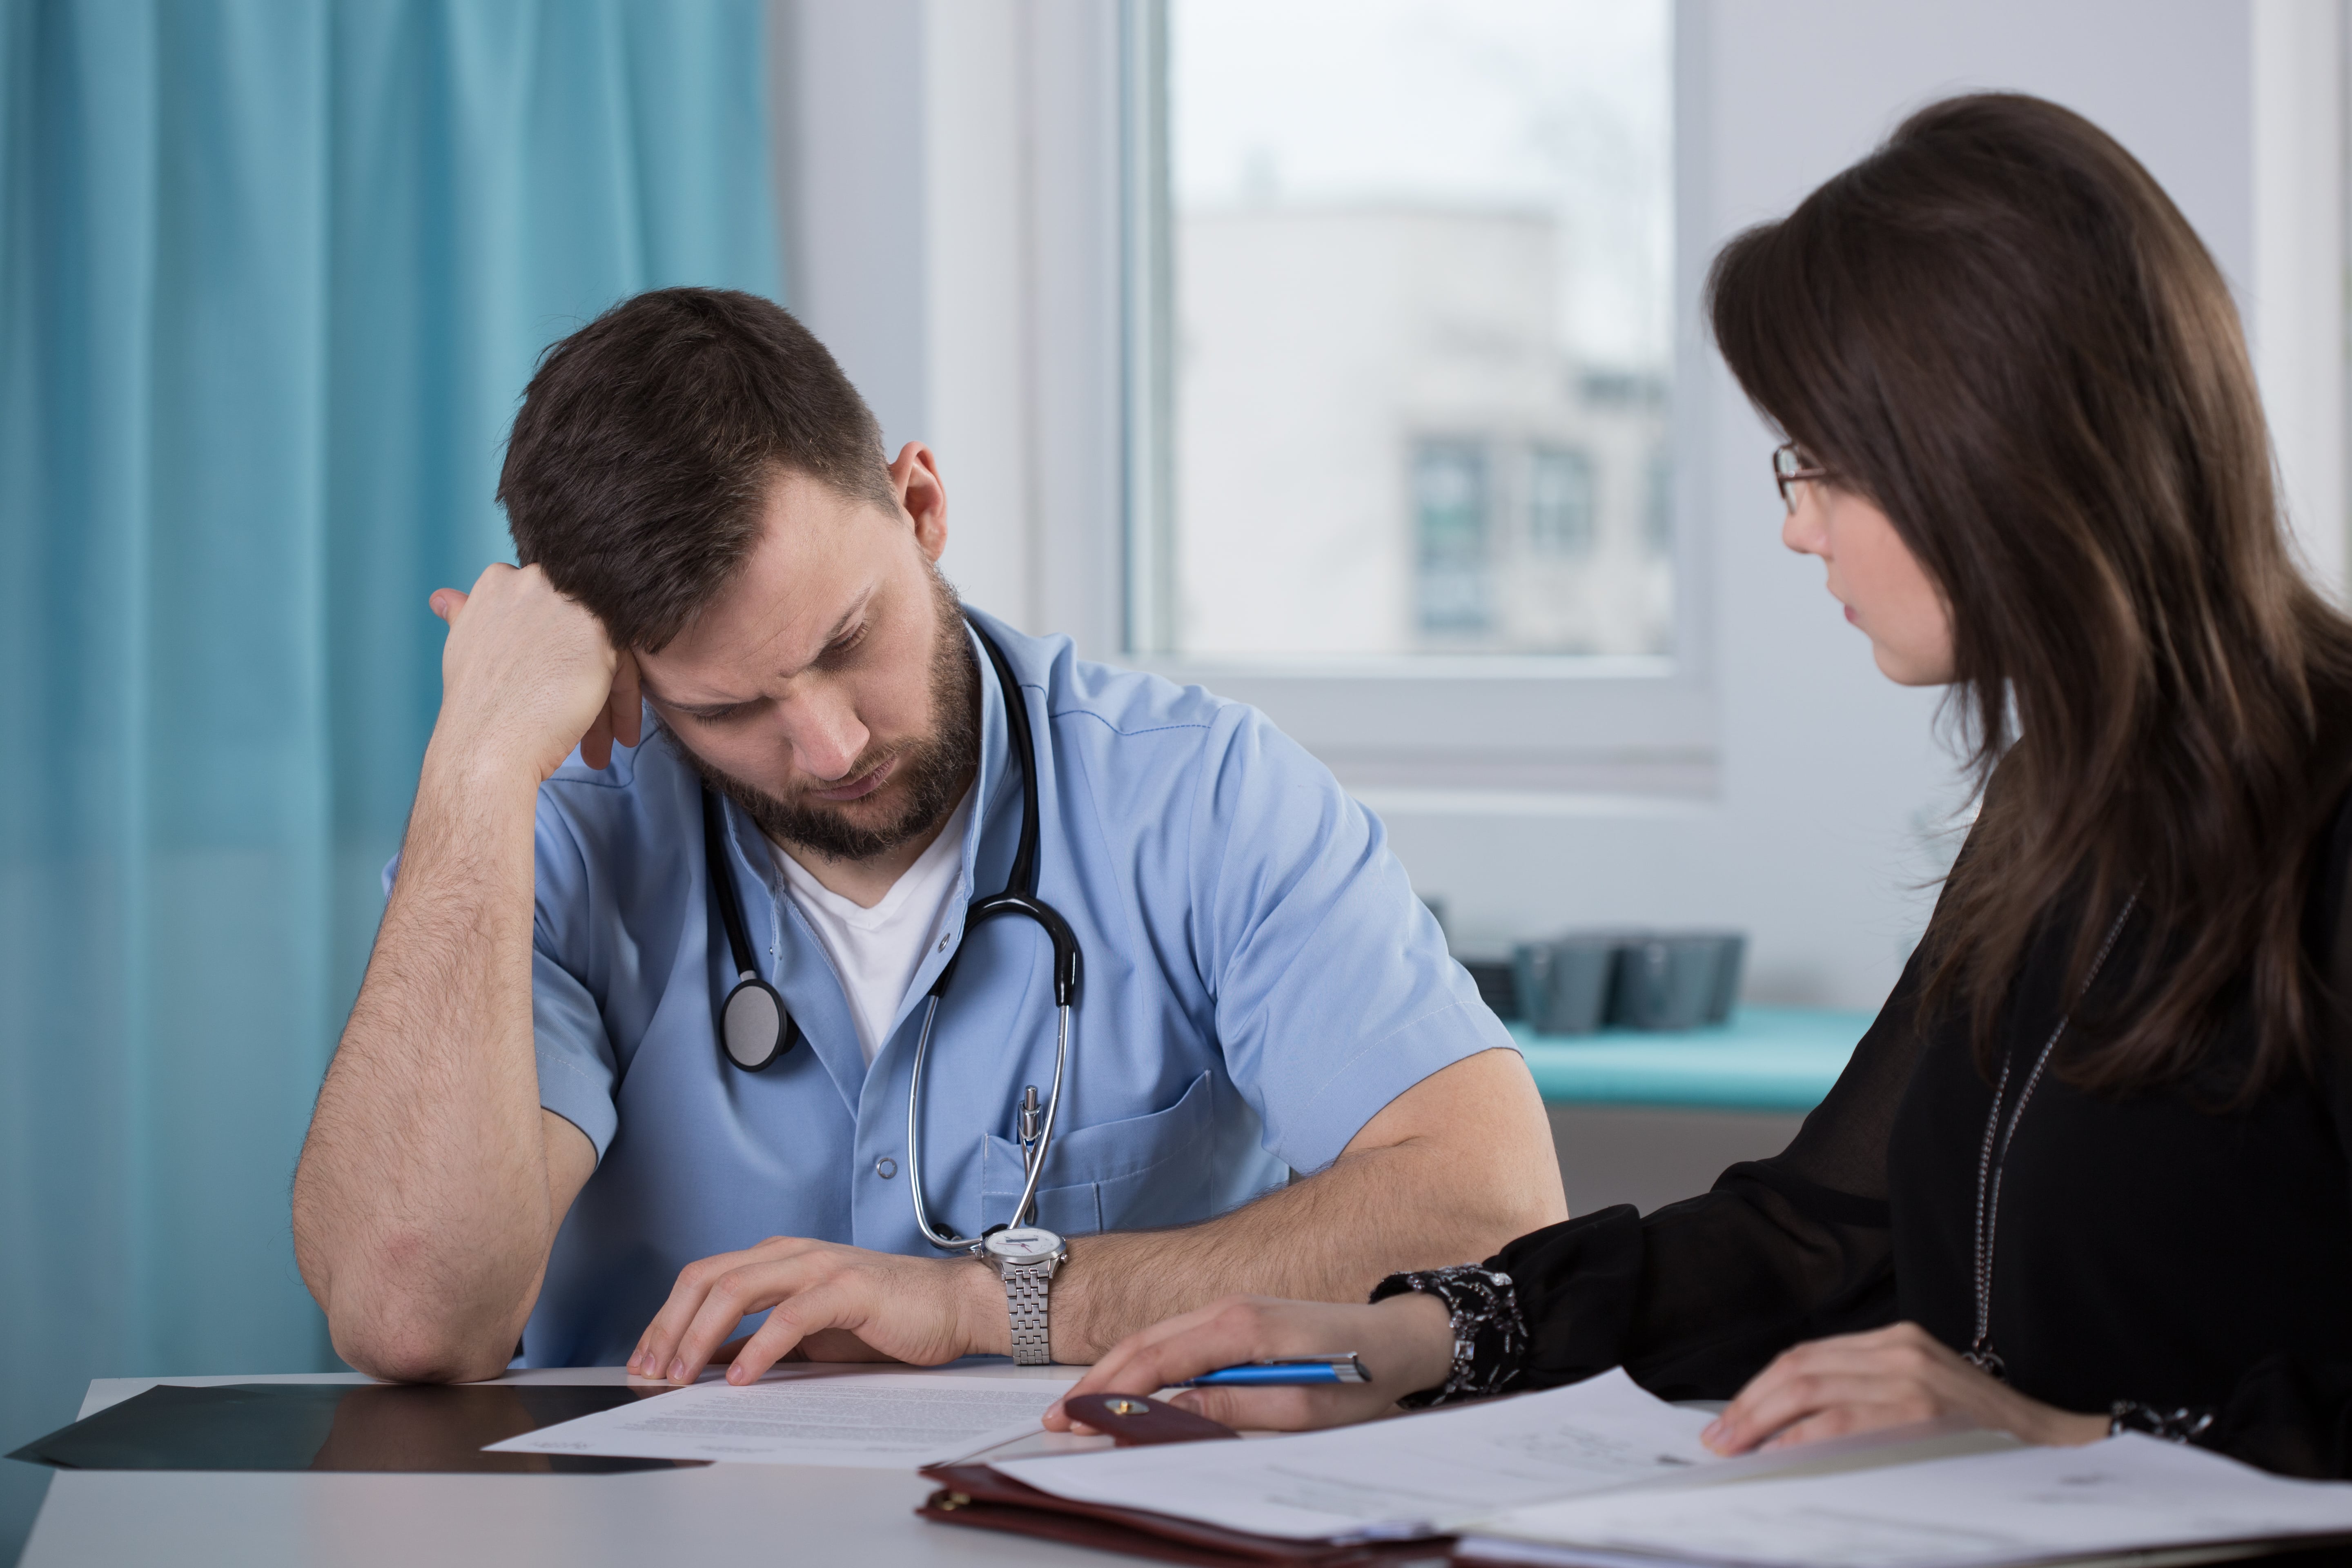 How can I find out if a doctor has ever been disciplined by the Virginia Board of Medicine or whether the doctor has paid a medical malpractice settlement?